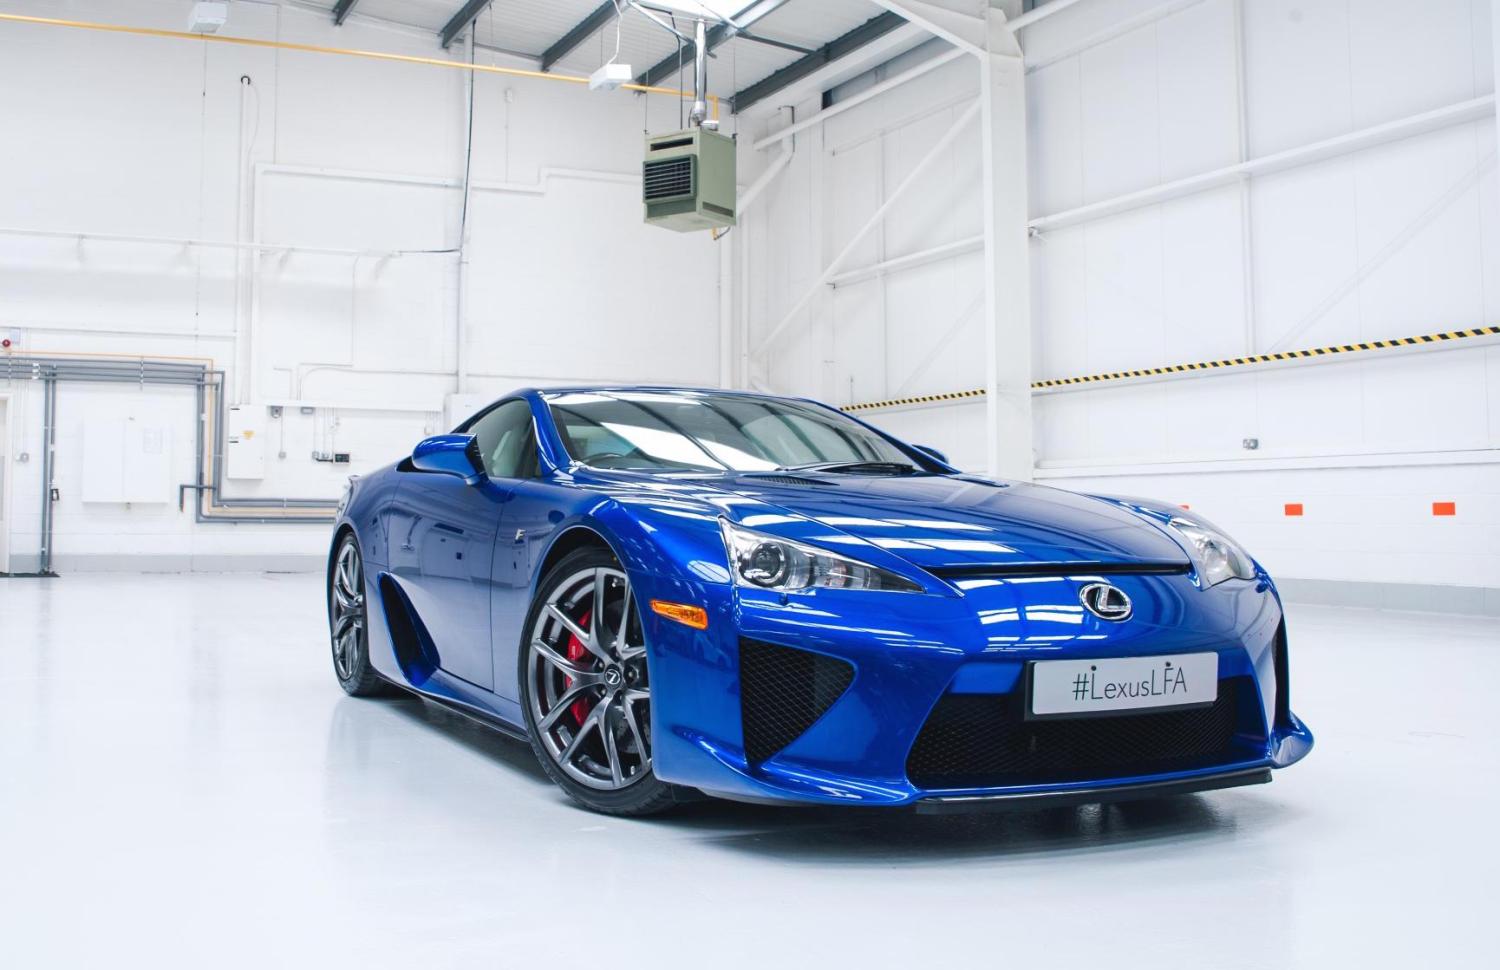 Lexus Has Trademarked ‘LFA’ - Let The Hype Commence